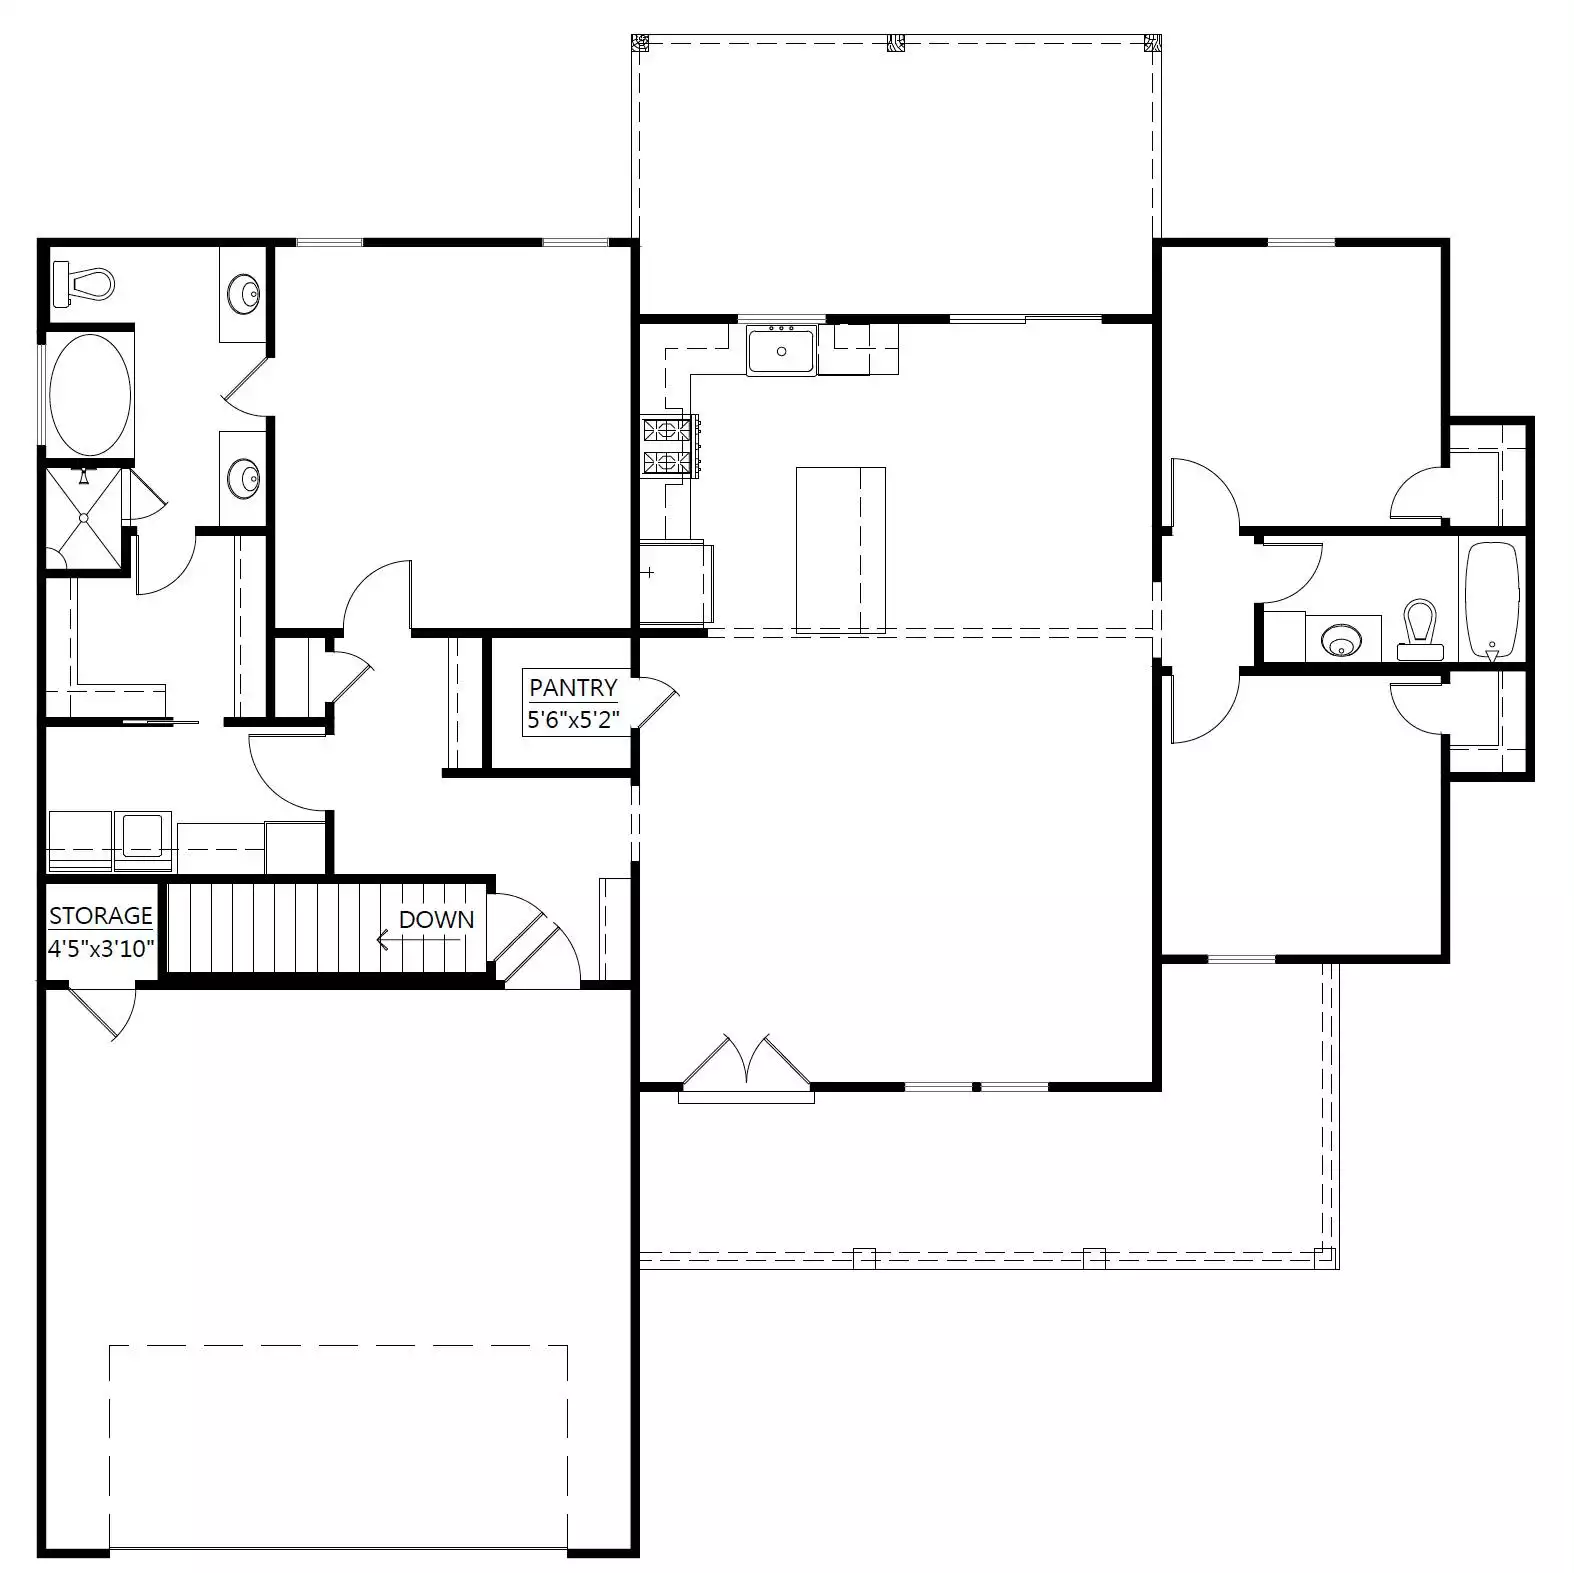 Main Floorplan with Staircase to Basement